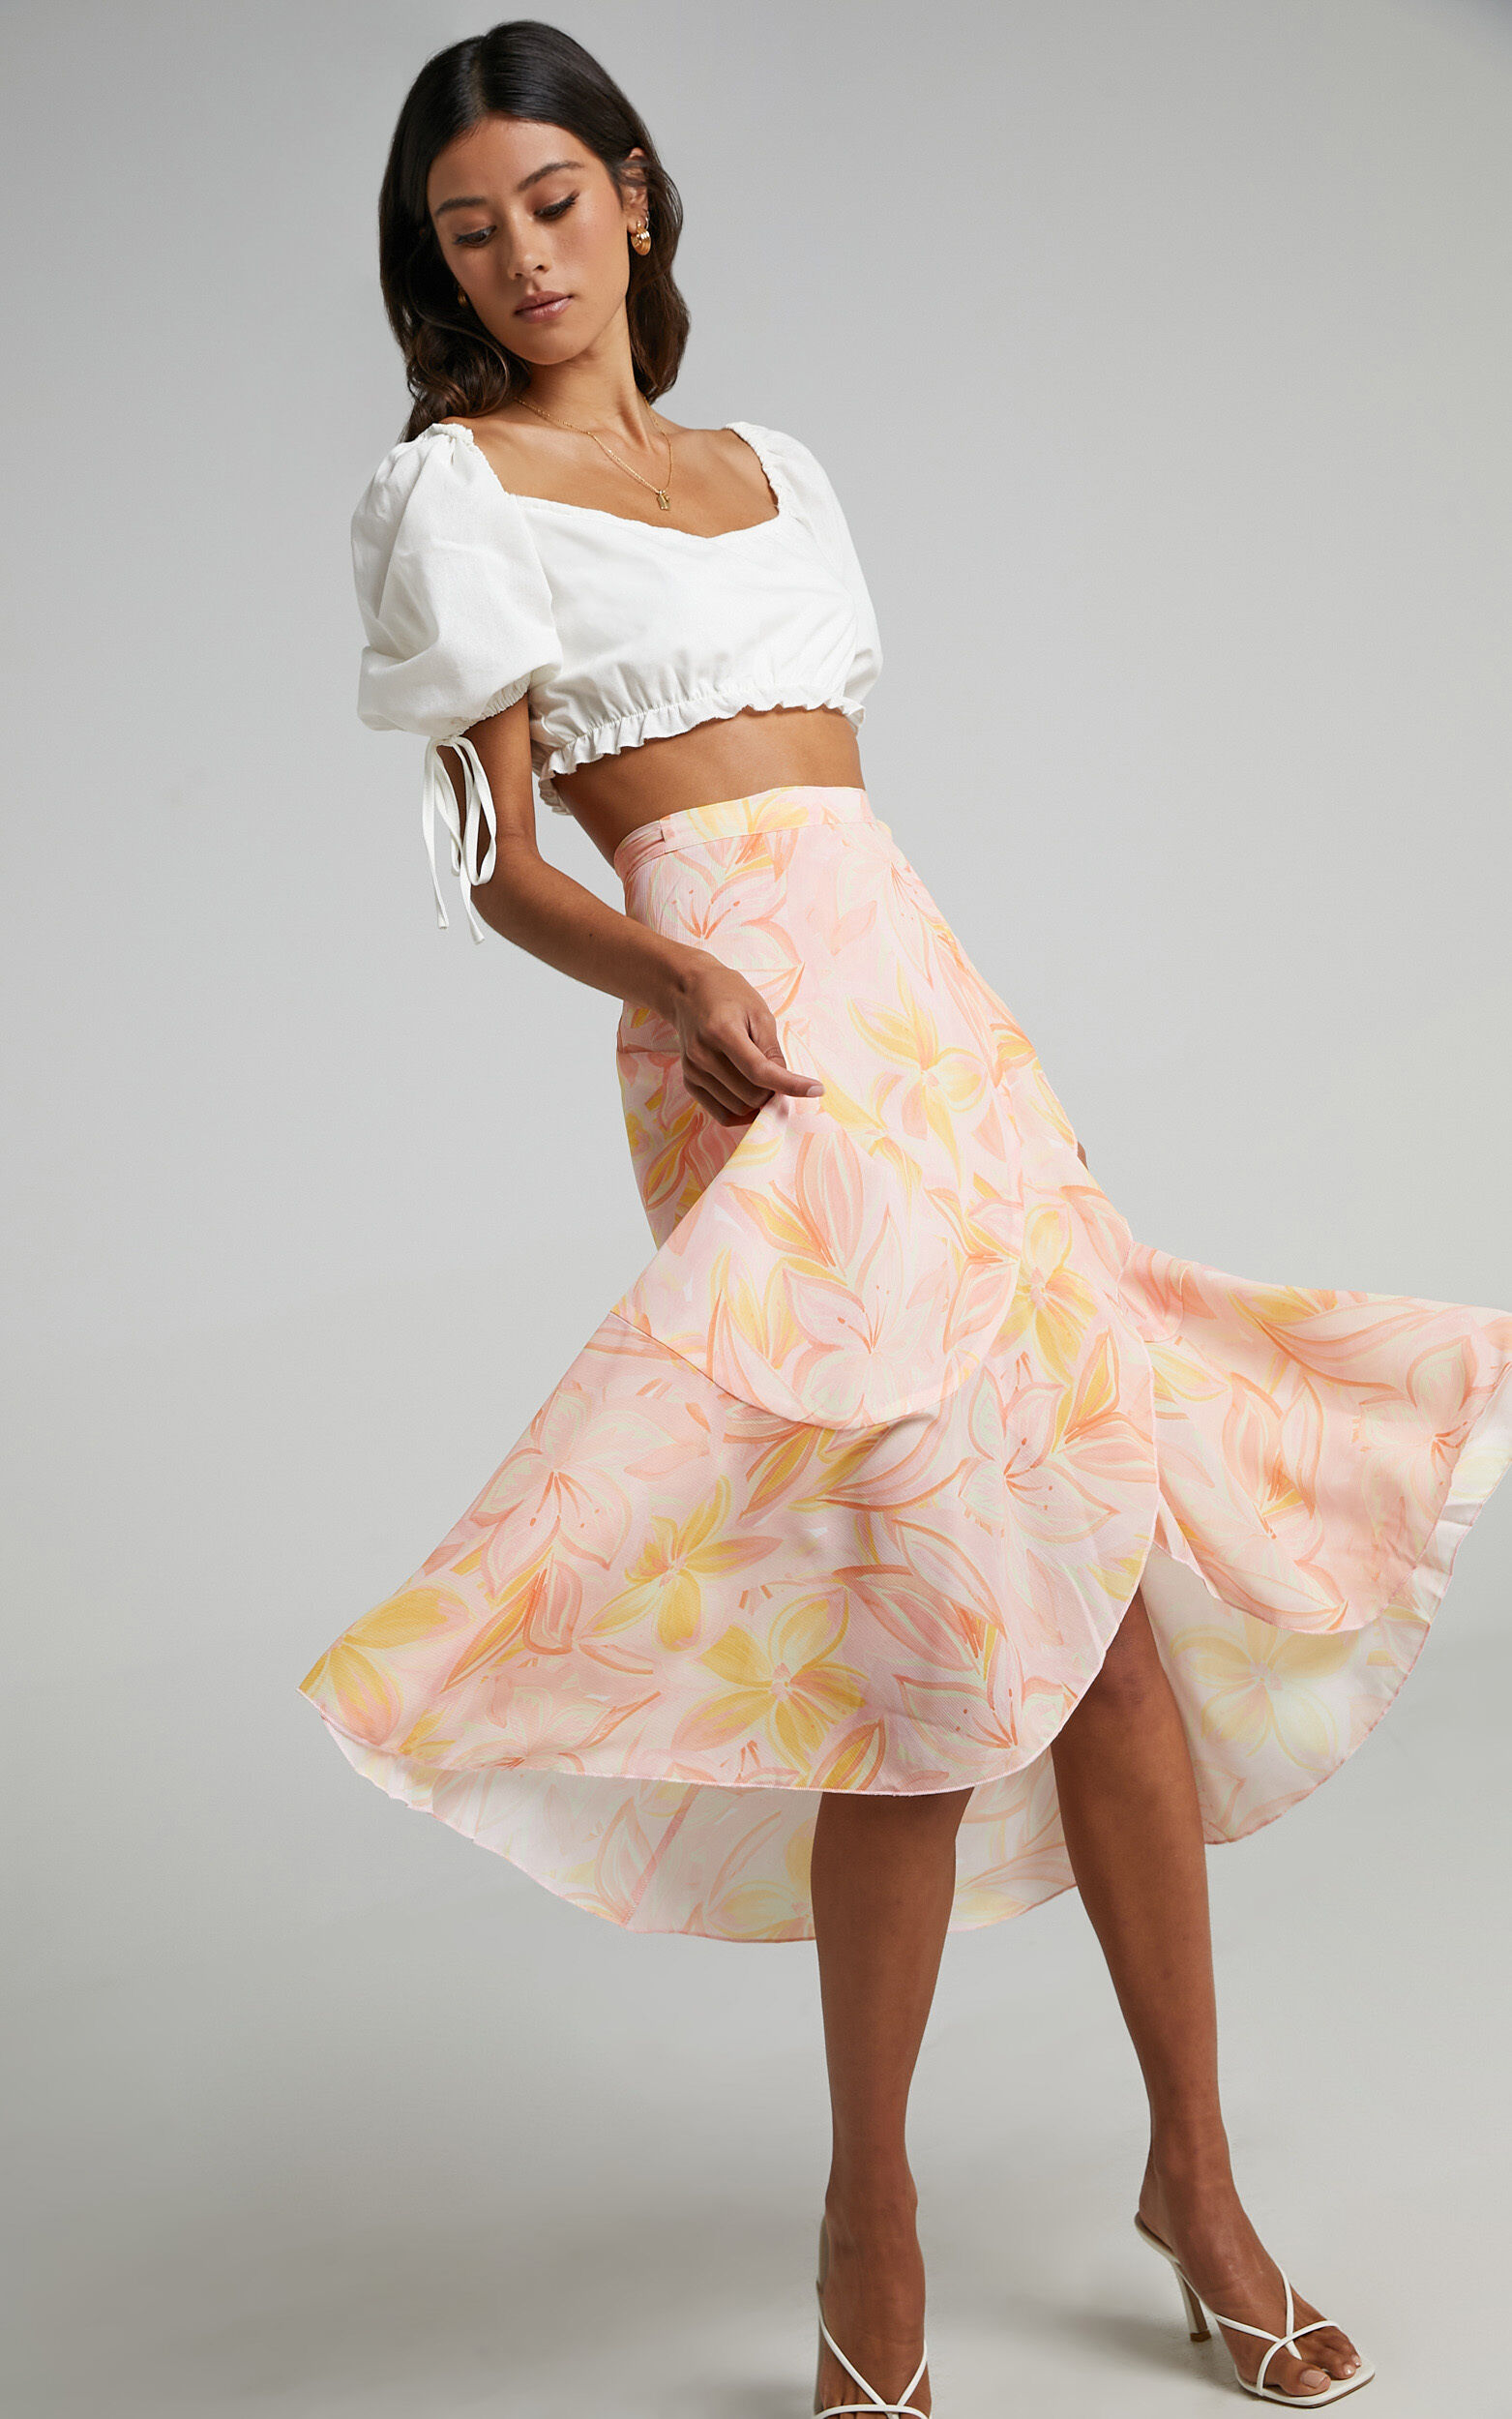 Add To The Mix Skirt in Summer Floral - 06, PNK1, super-hi-res image number null